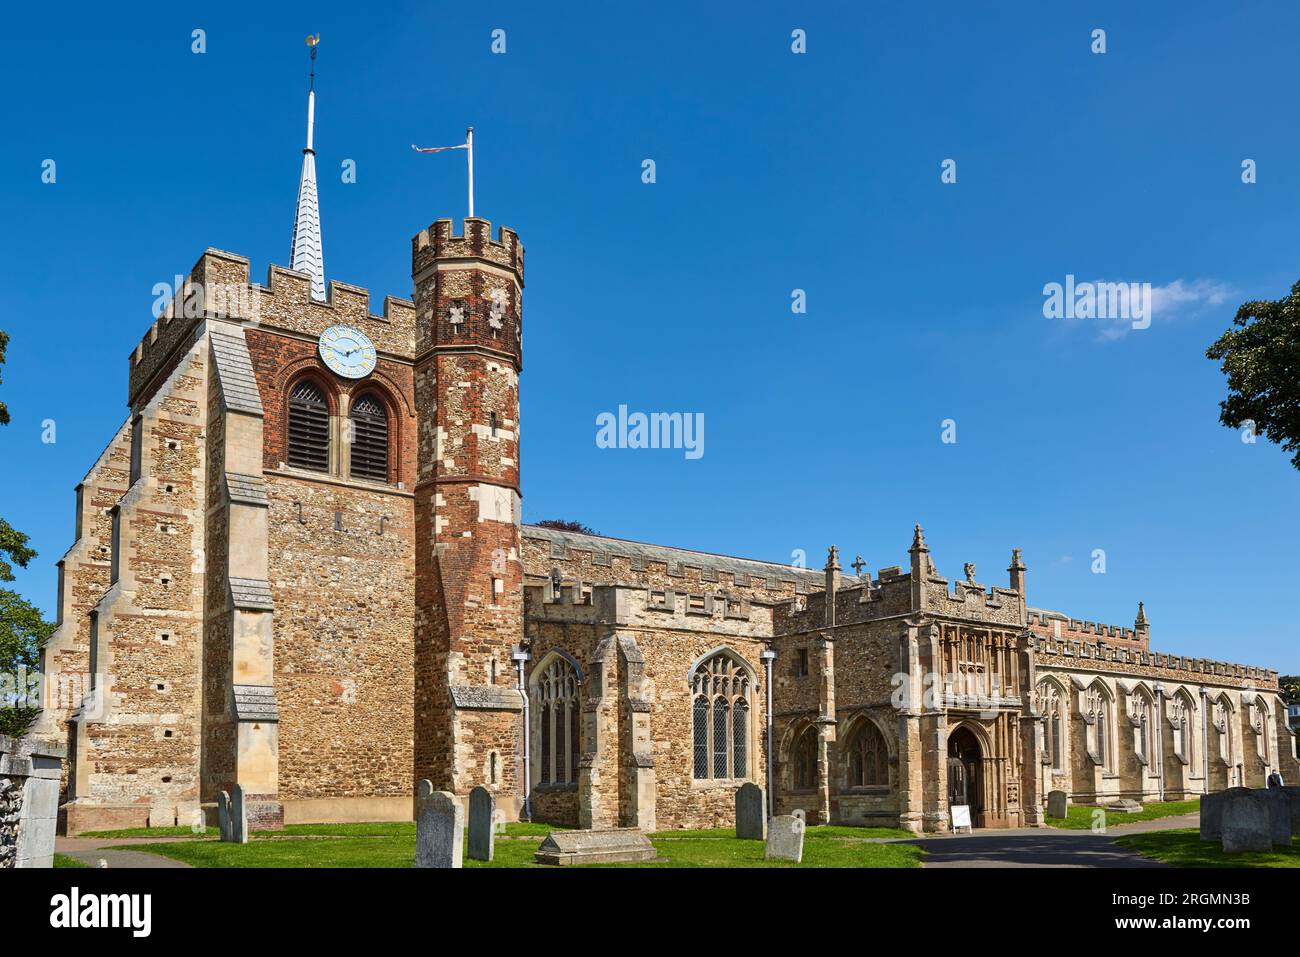 The exterior of historic St Mary's church at Hitchin, Hertfordshire, England, with 12th century tower Stock Photo